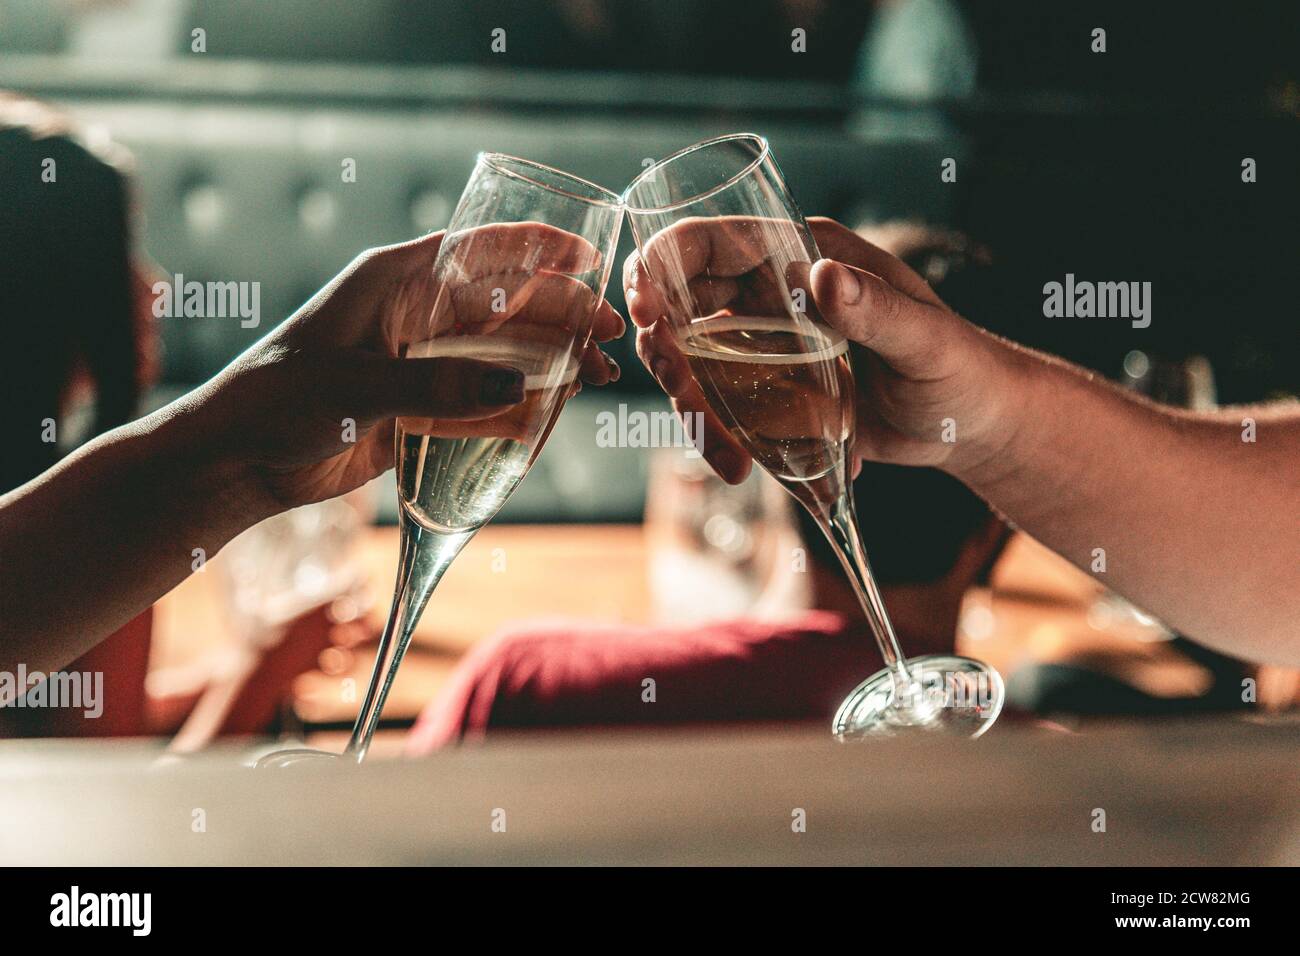 Best Friends Raising Wine Glasses Toasting Celebrating Friendship Together  Crop Stock Photo by ©giulombardo.ct 619993698